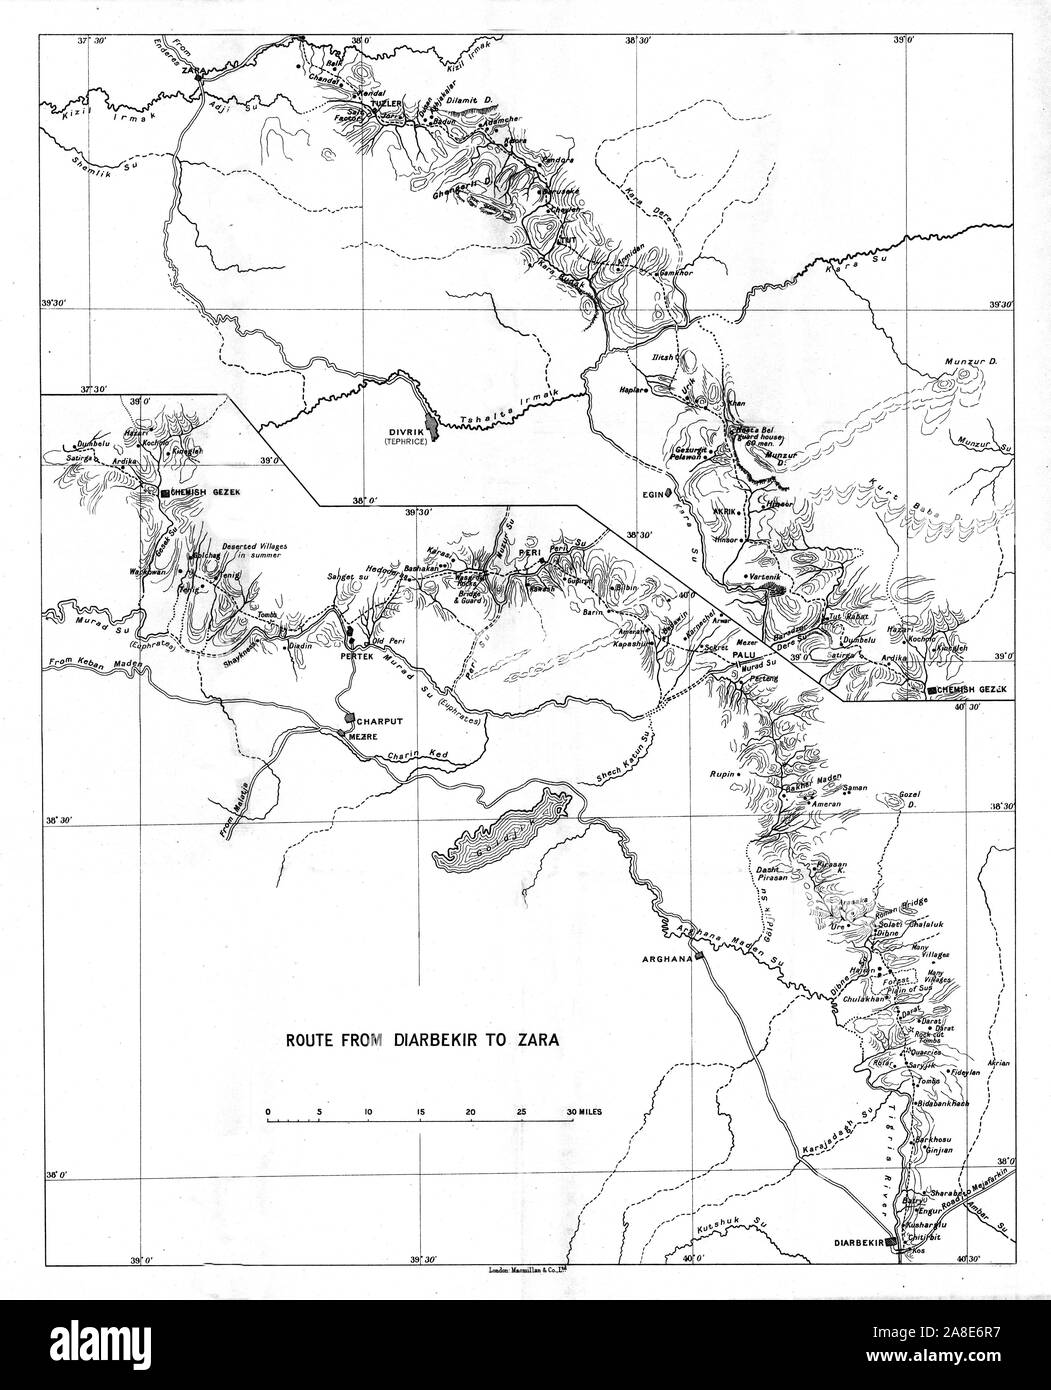 Route from Diarbekir to Zara', c1915. Map showing the journey of British  writer, soldier and diplomatic advisor Mark Sykes between Diyarbakir and  Zara in Turkey, (at that time part of the Ottoman